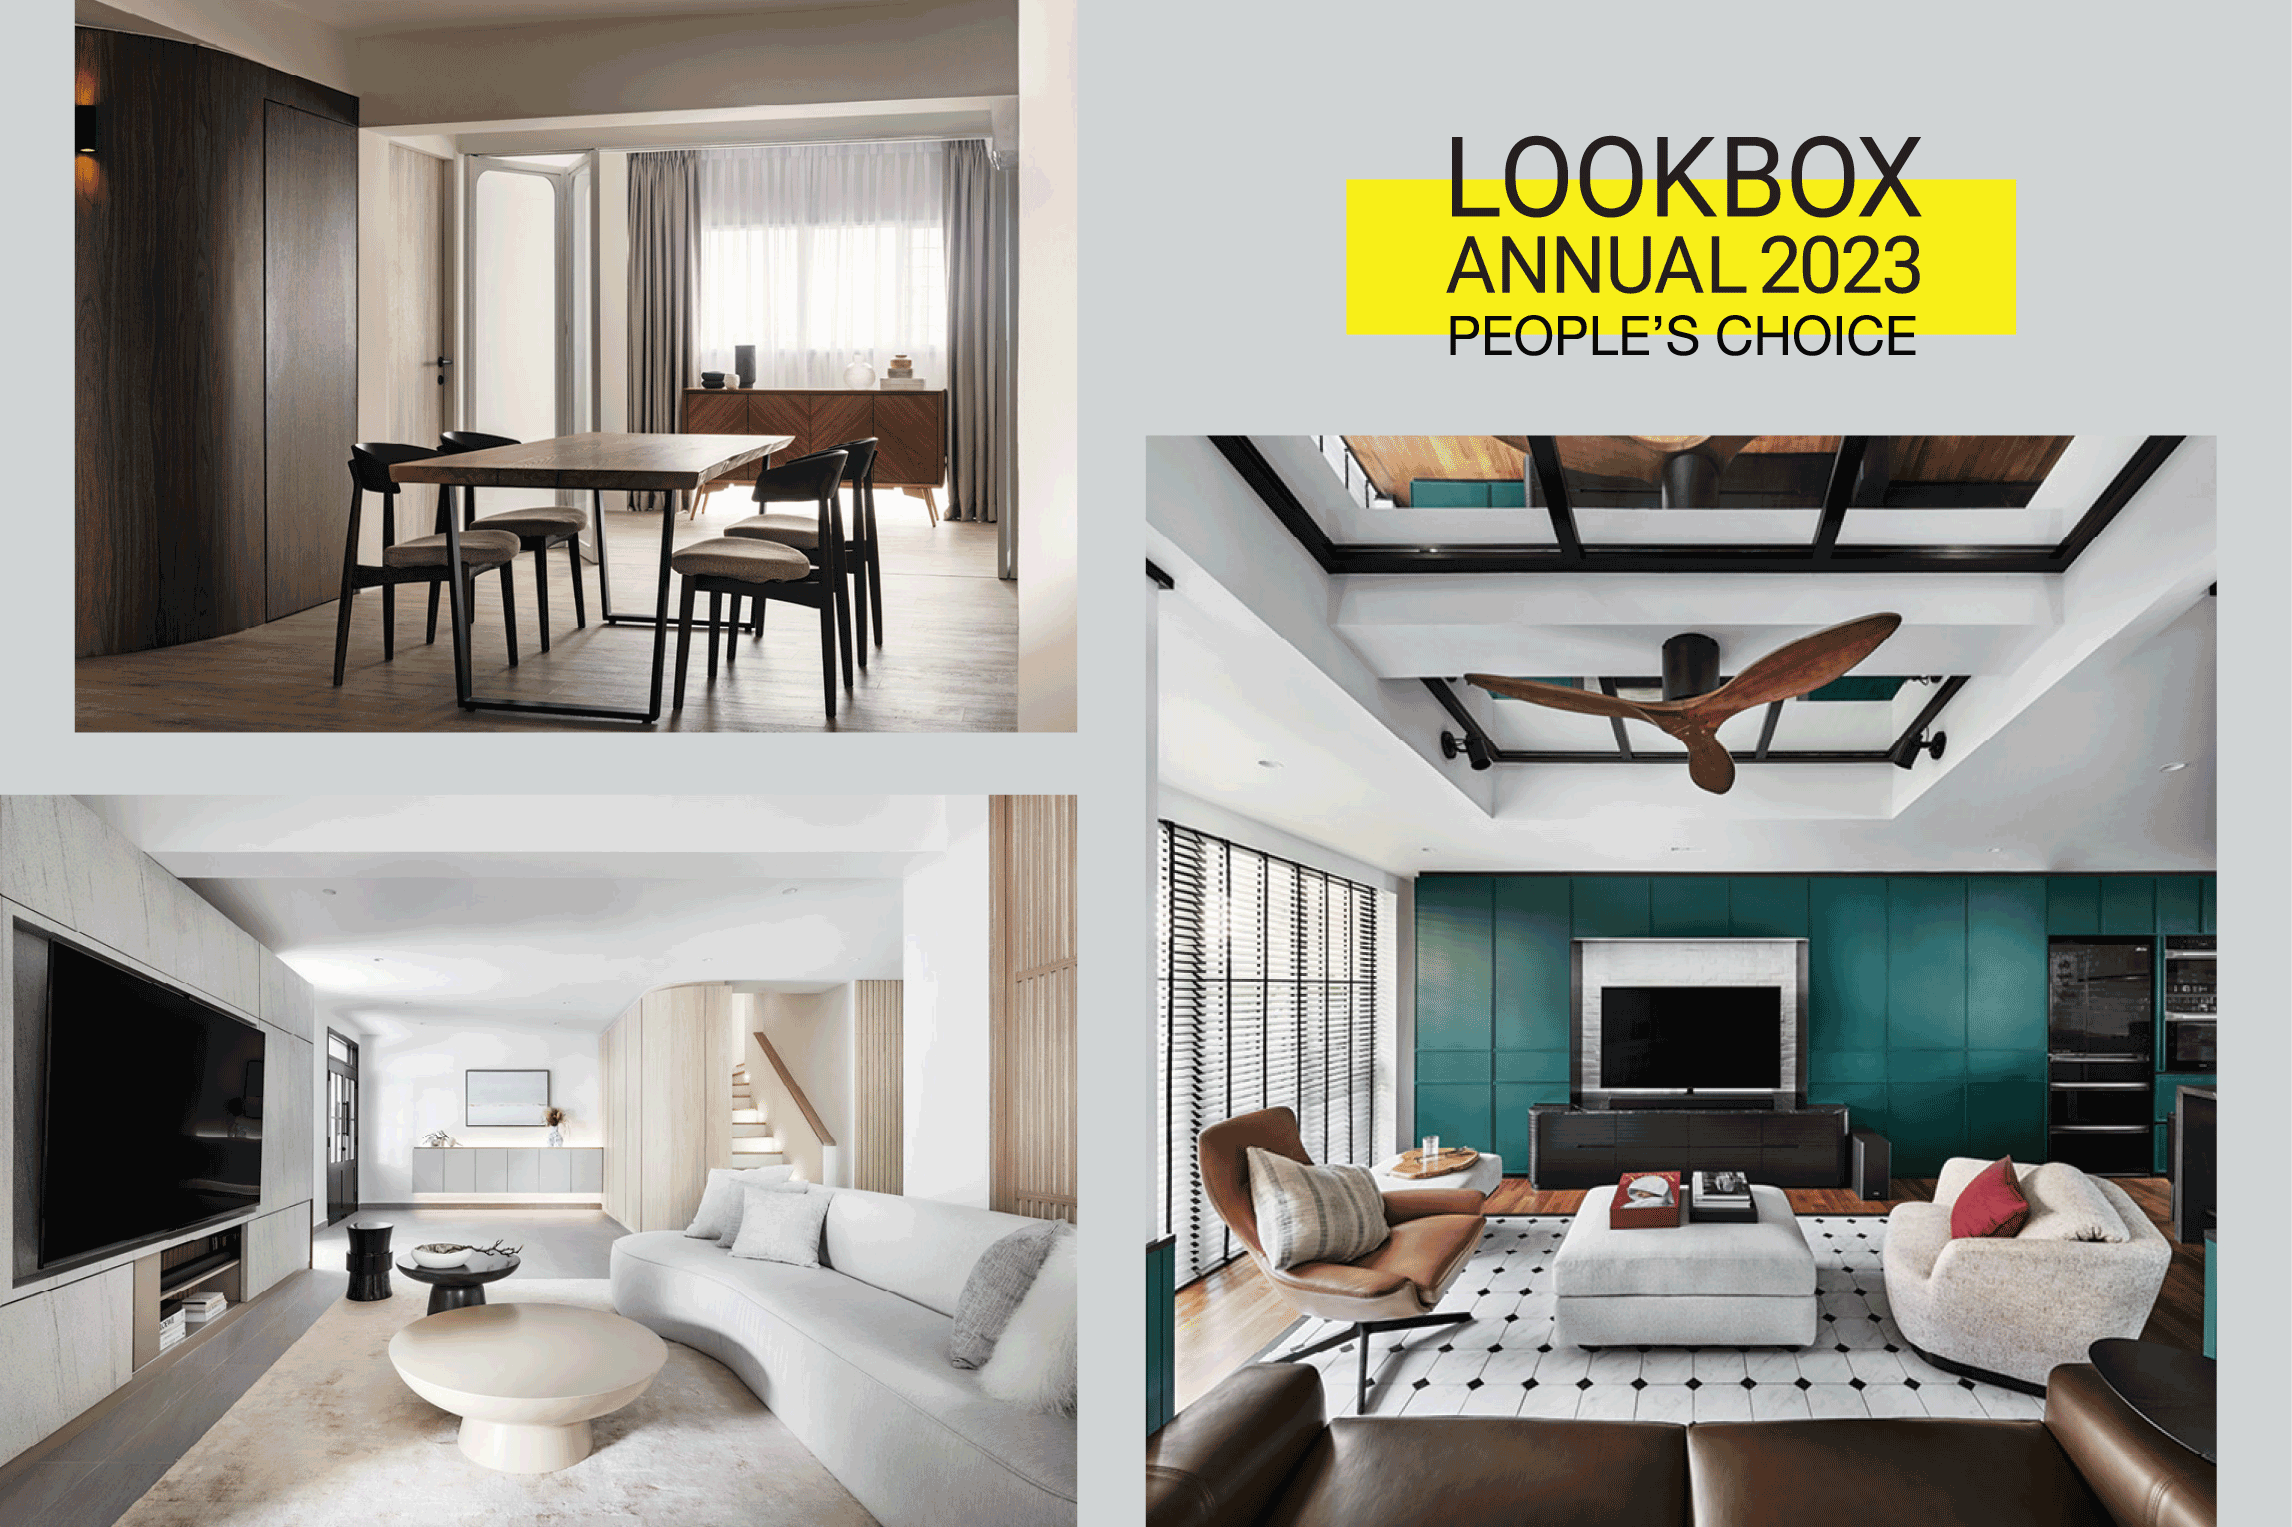 Last chance to vote and win in Lookbox Annual 2023 People’s Choice